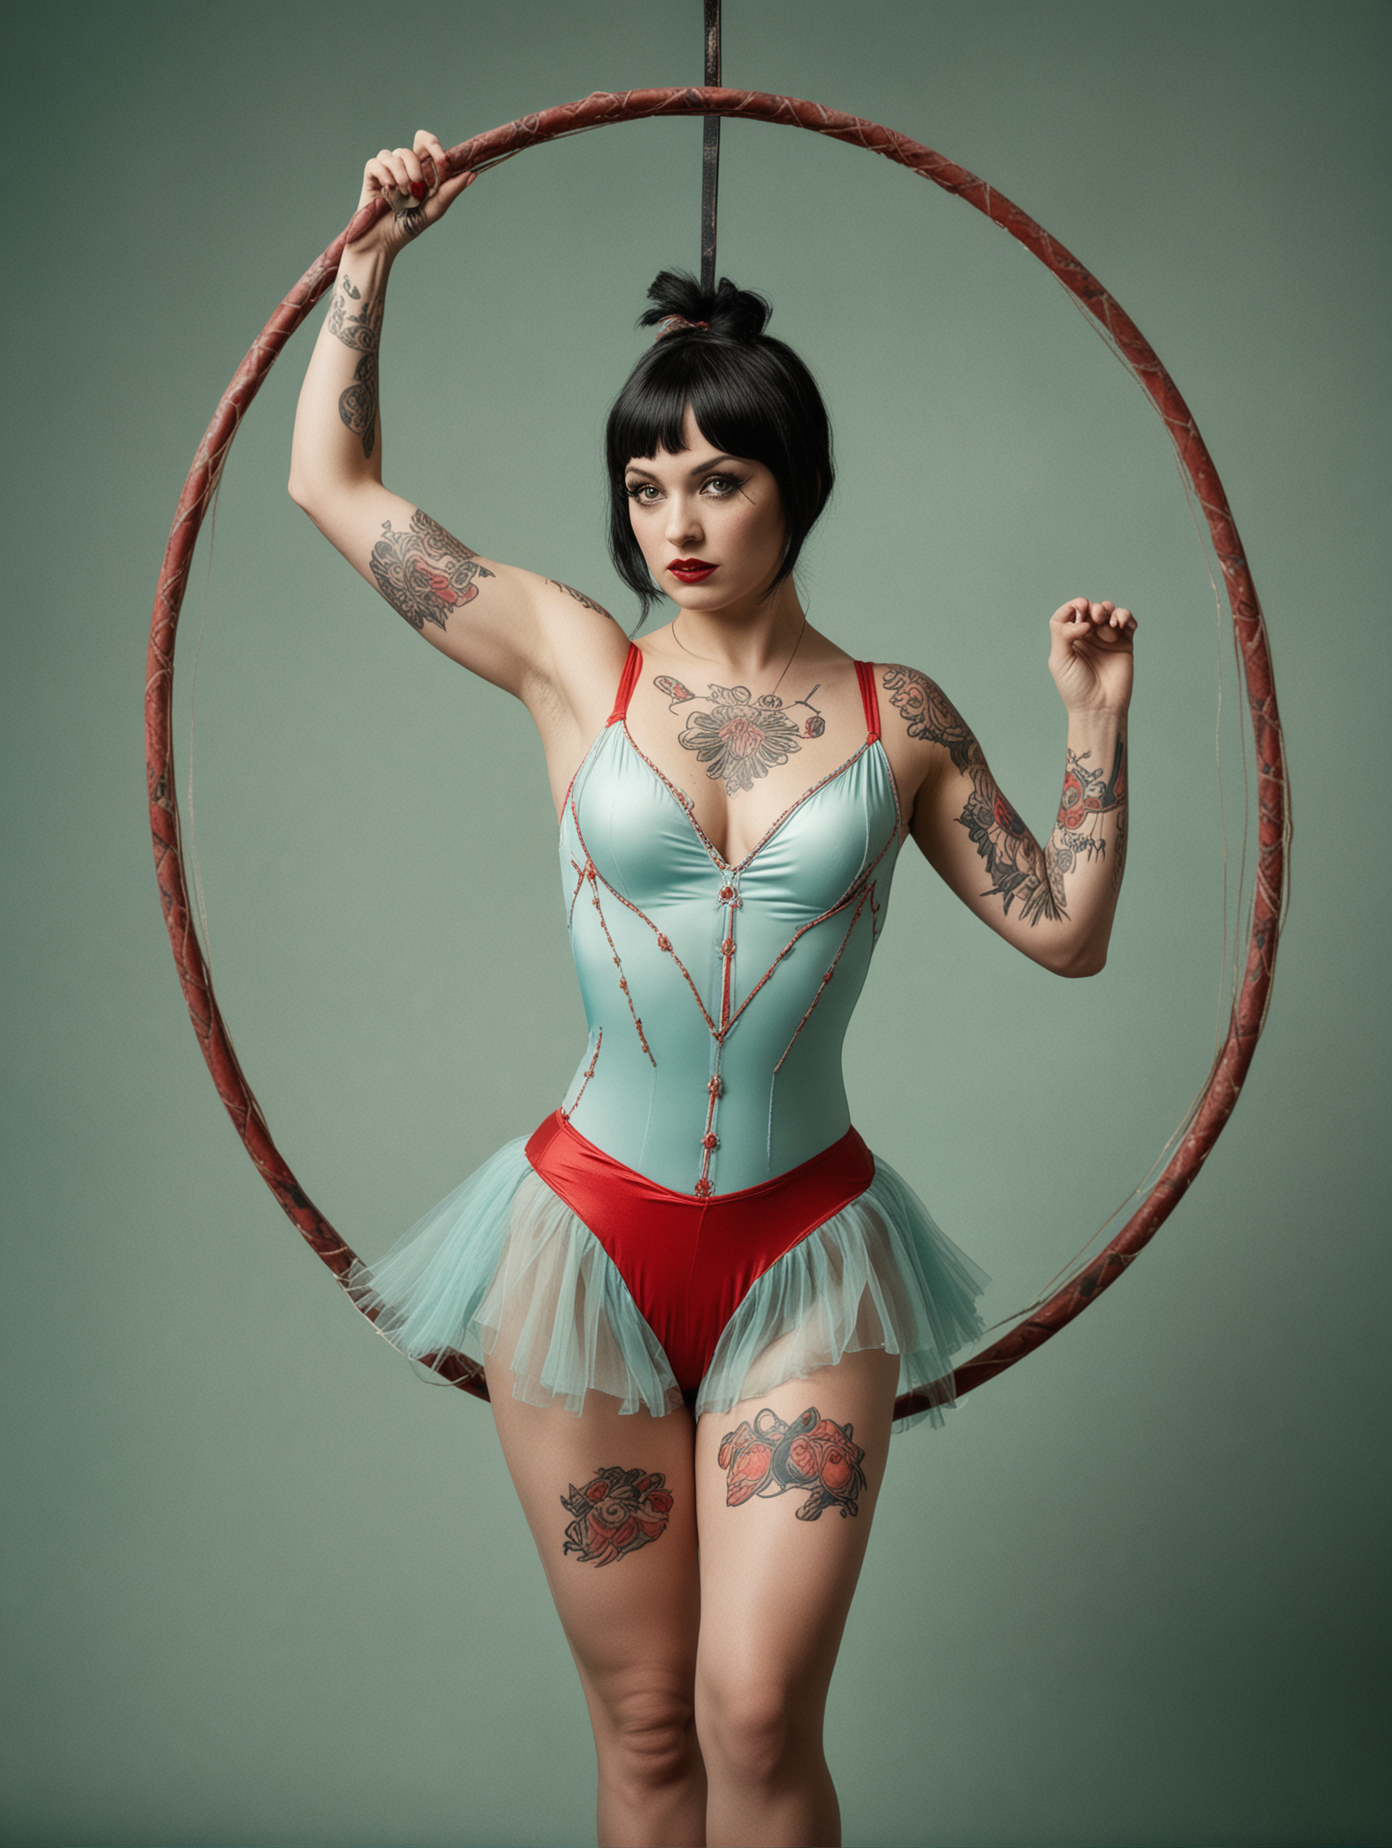 circus, in the style of whimsical yet eerie symbolism, American 1920's circus, light cyan and red palette, close up portraiture, well built busty female acrobat with black hair, wearing a leotard and tutu, covered in tatoos, holding an aerial hoop, nature-inspired pieces, circus costumes, ultra details